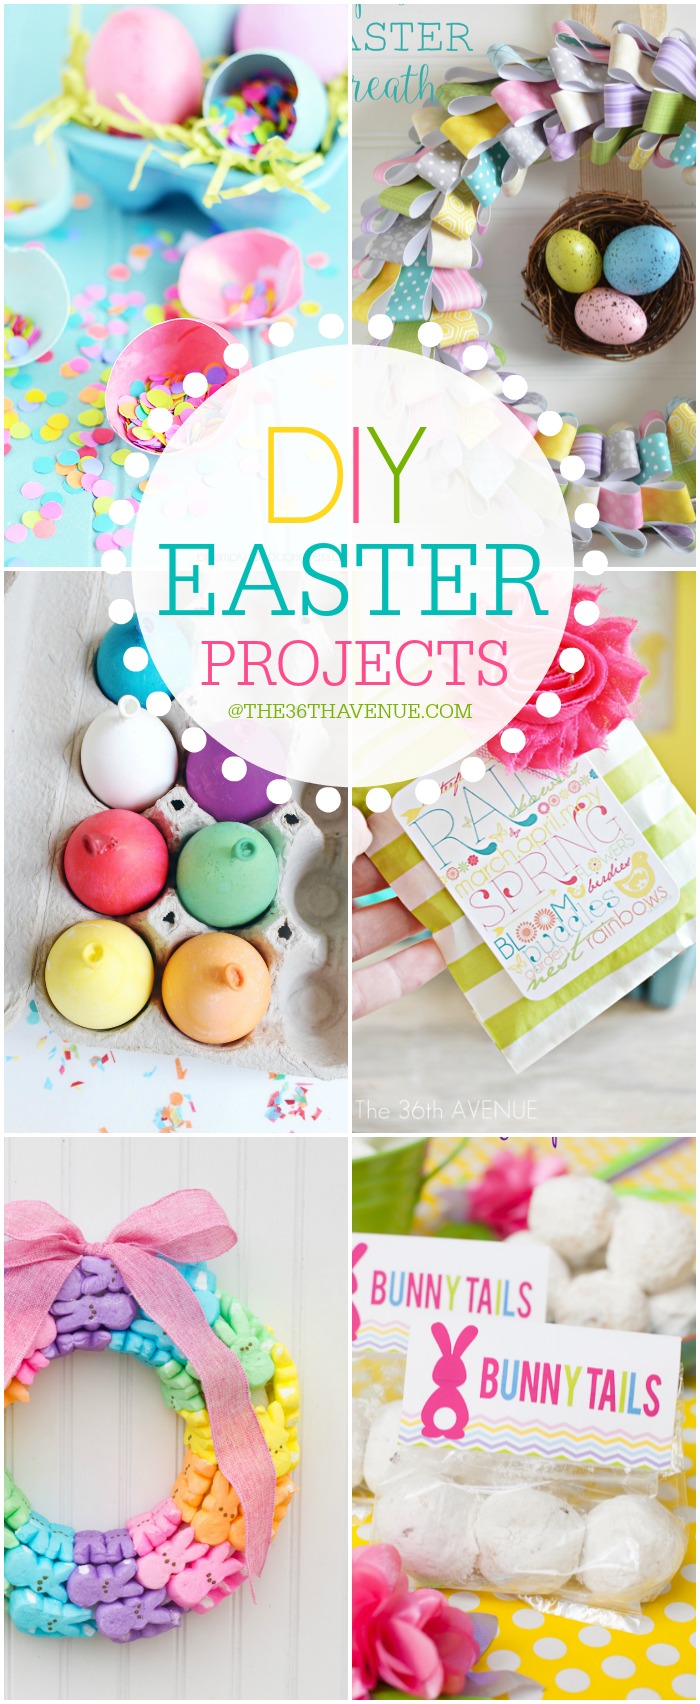 The 36th AVENUE | Easter Crafts and DIY Decor Ideas | The 36th AVENUE